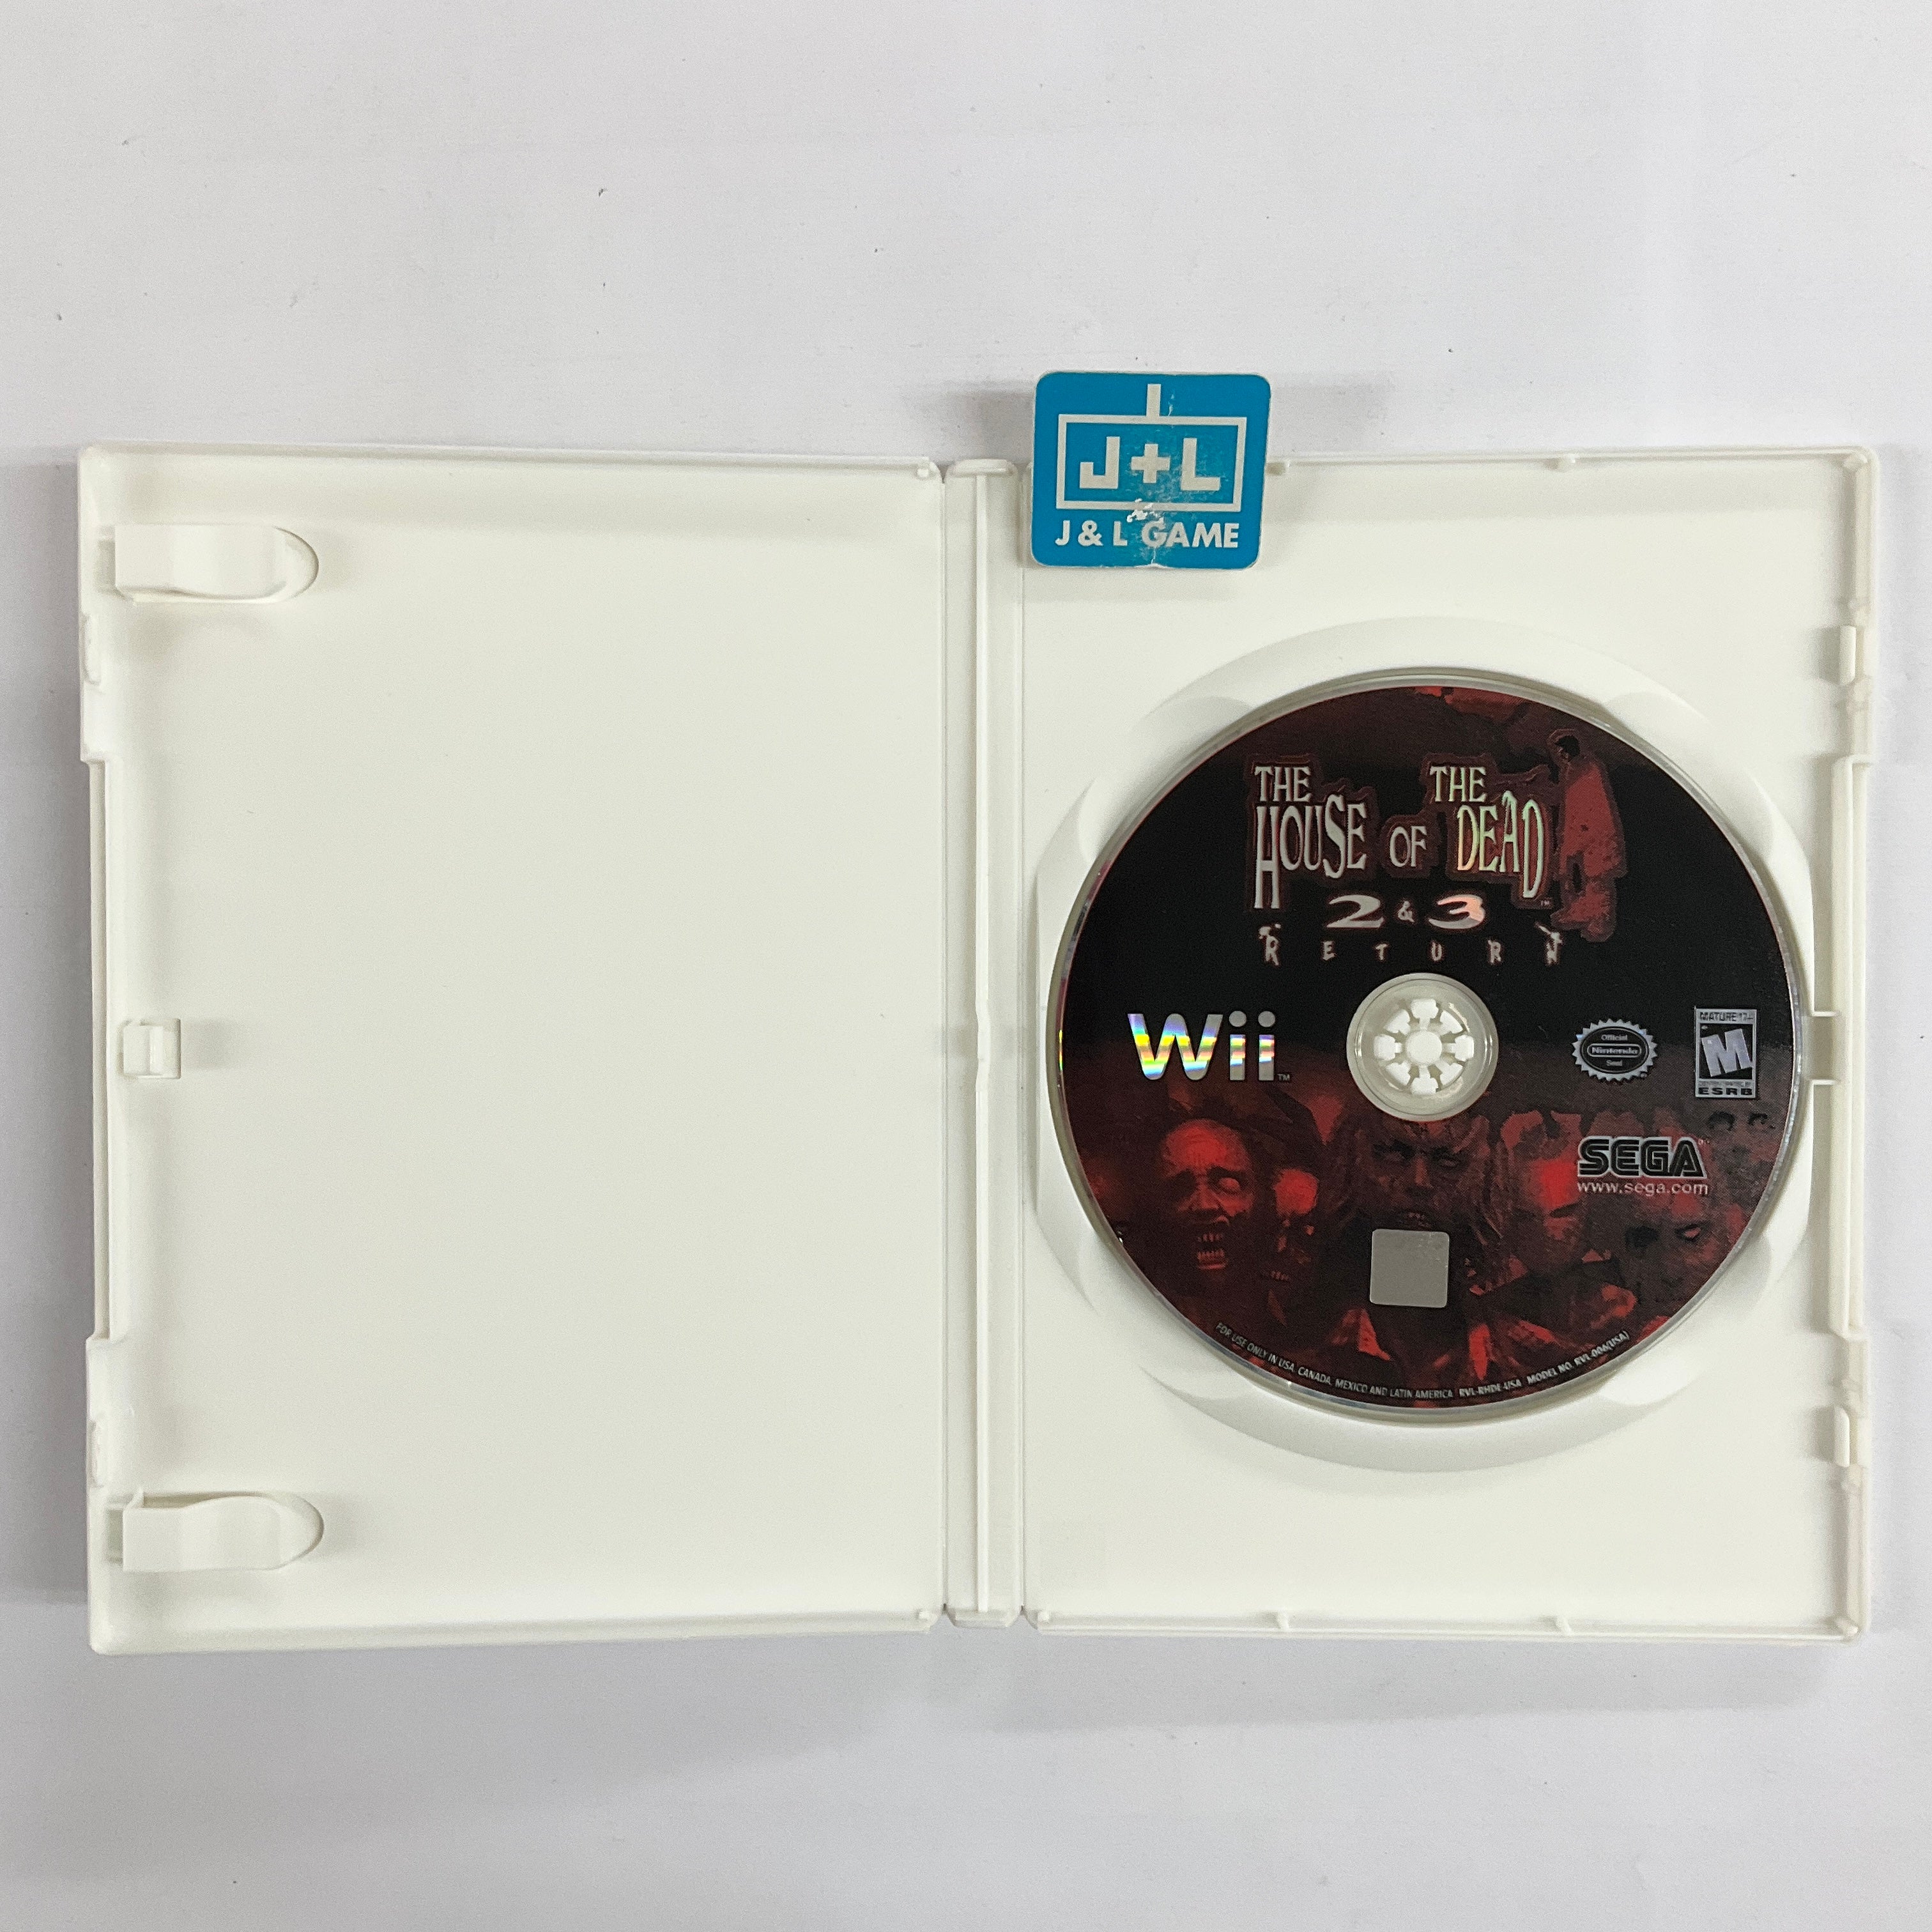 The House of the Dead 2 & 3 Return - Nintendo Wii [Pre-Owned] Video Games SEGA   